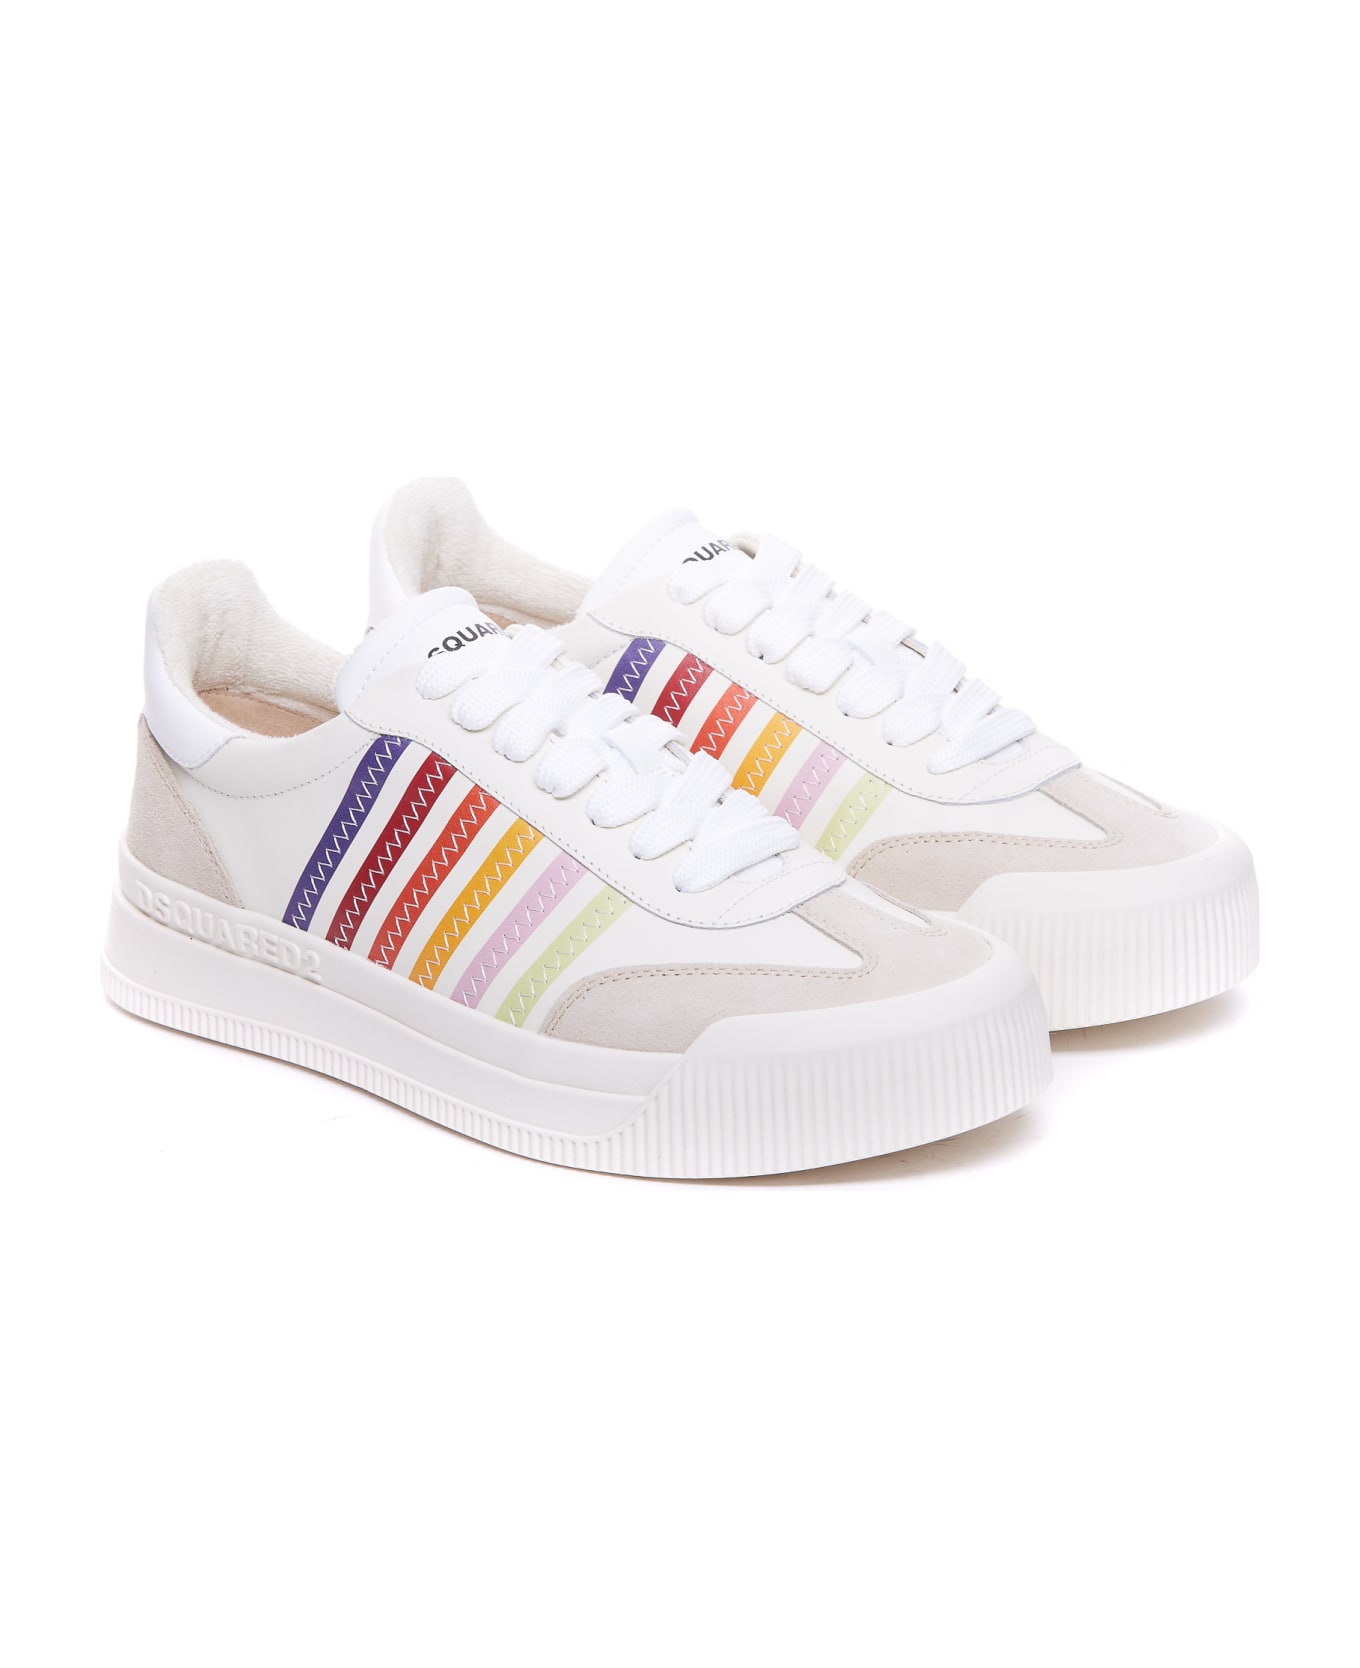 Dsquared2 New Jersey Lace-up Low Top Sneakers - Beige/multicolore スニーカー